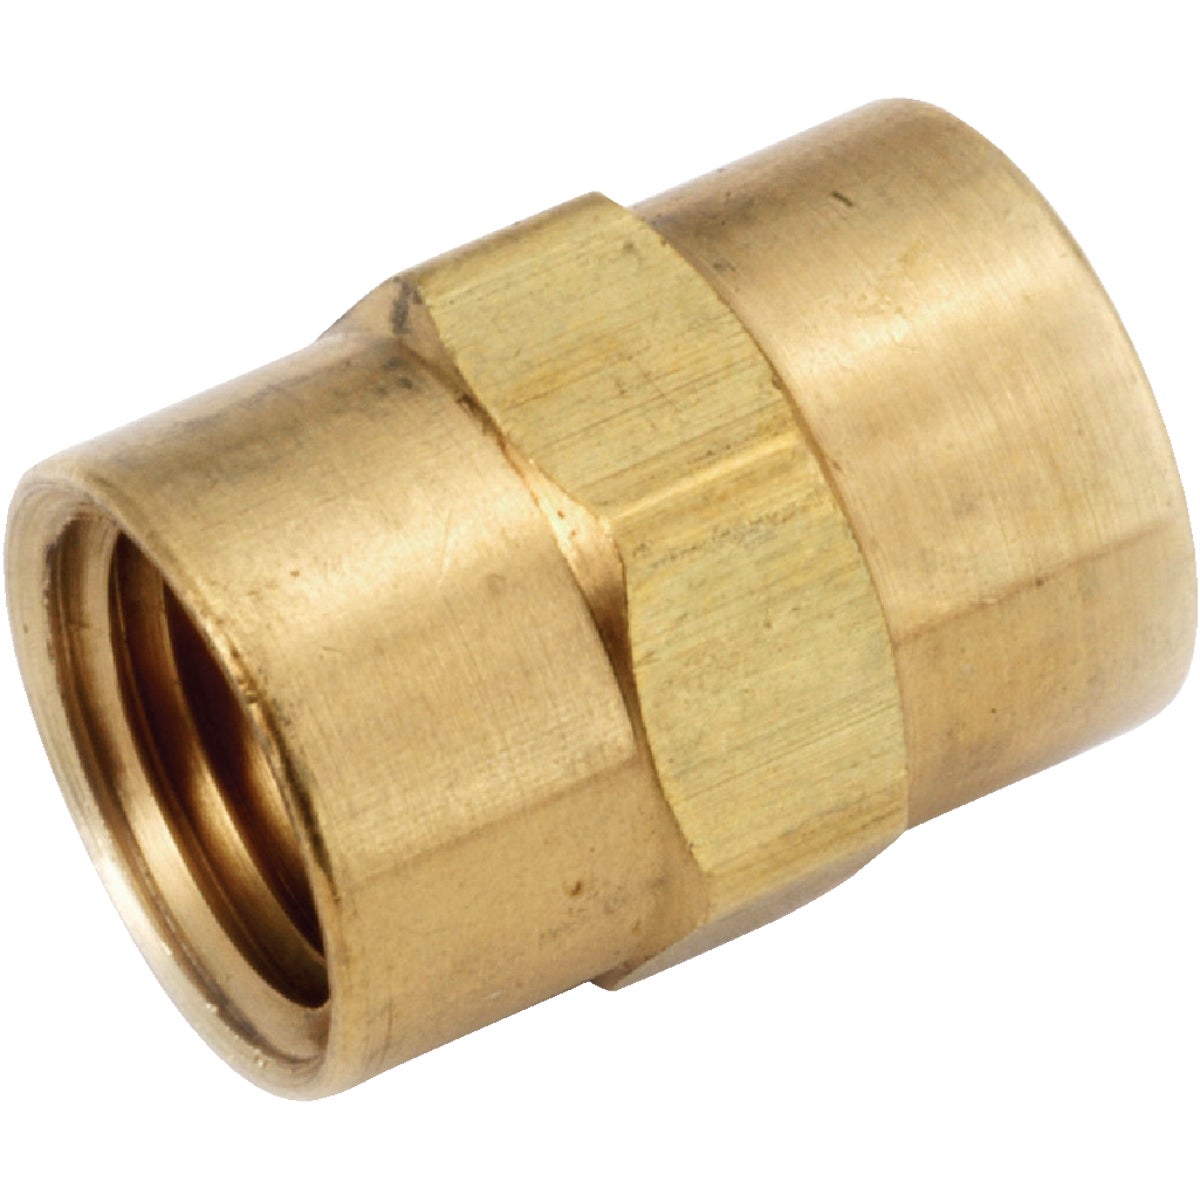 Anderson Metals 1/8 In. Yellow Brass Coupling